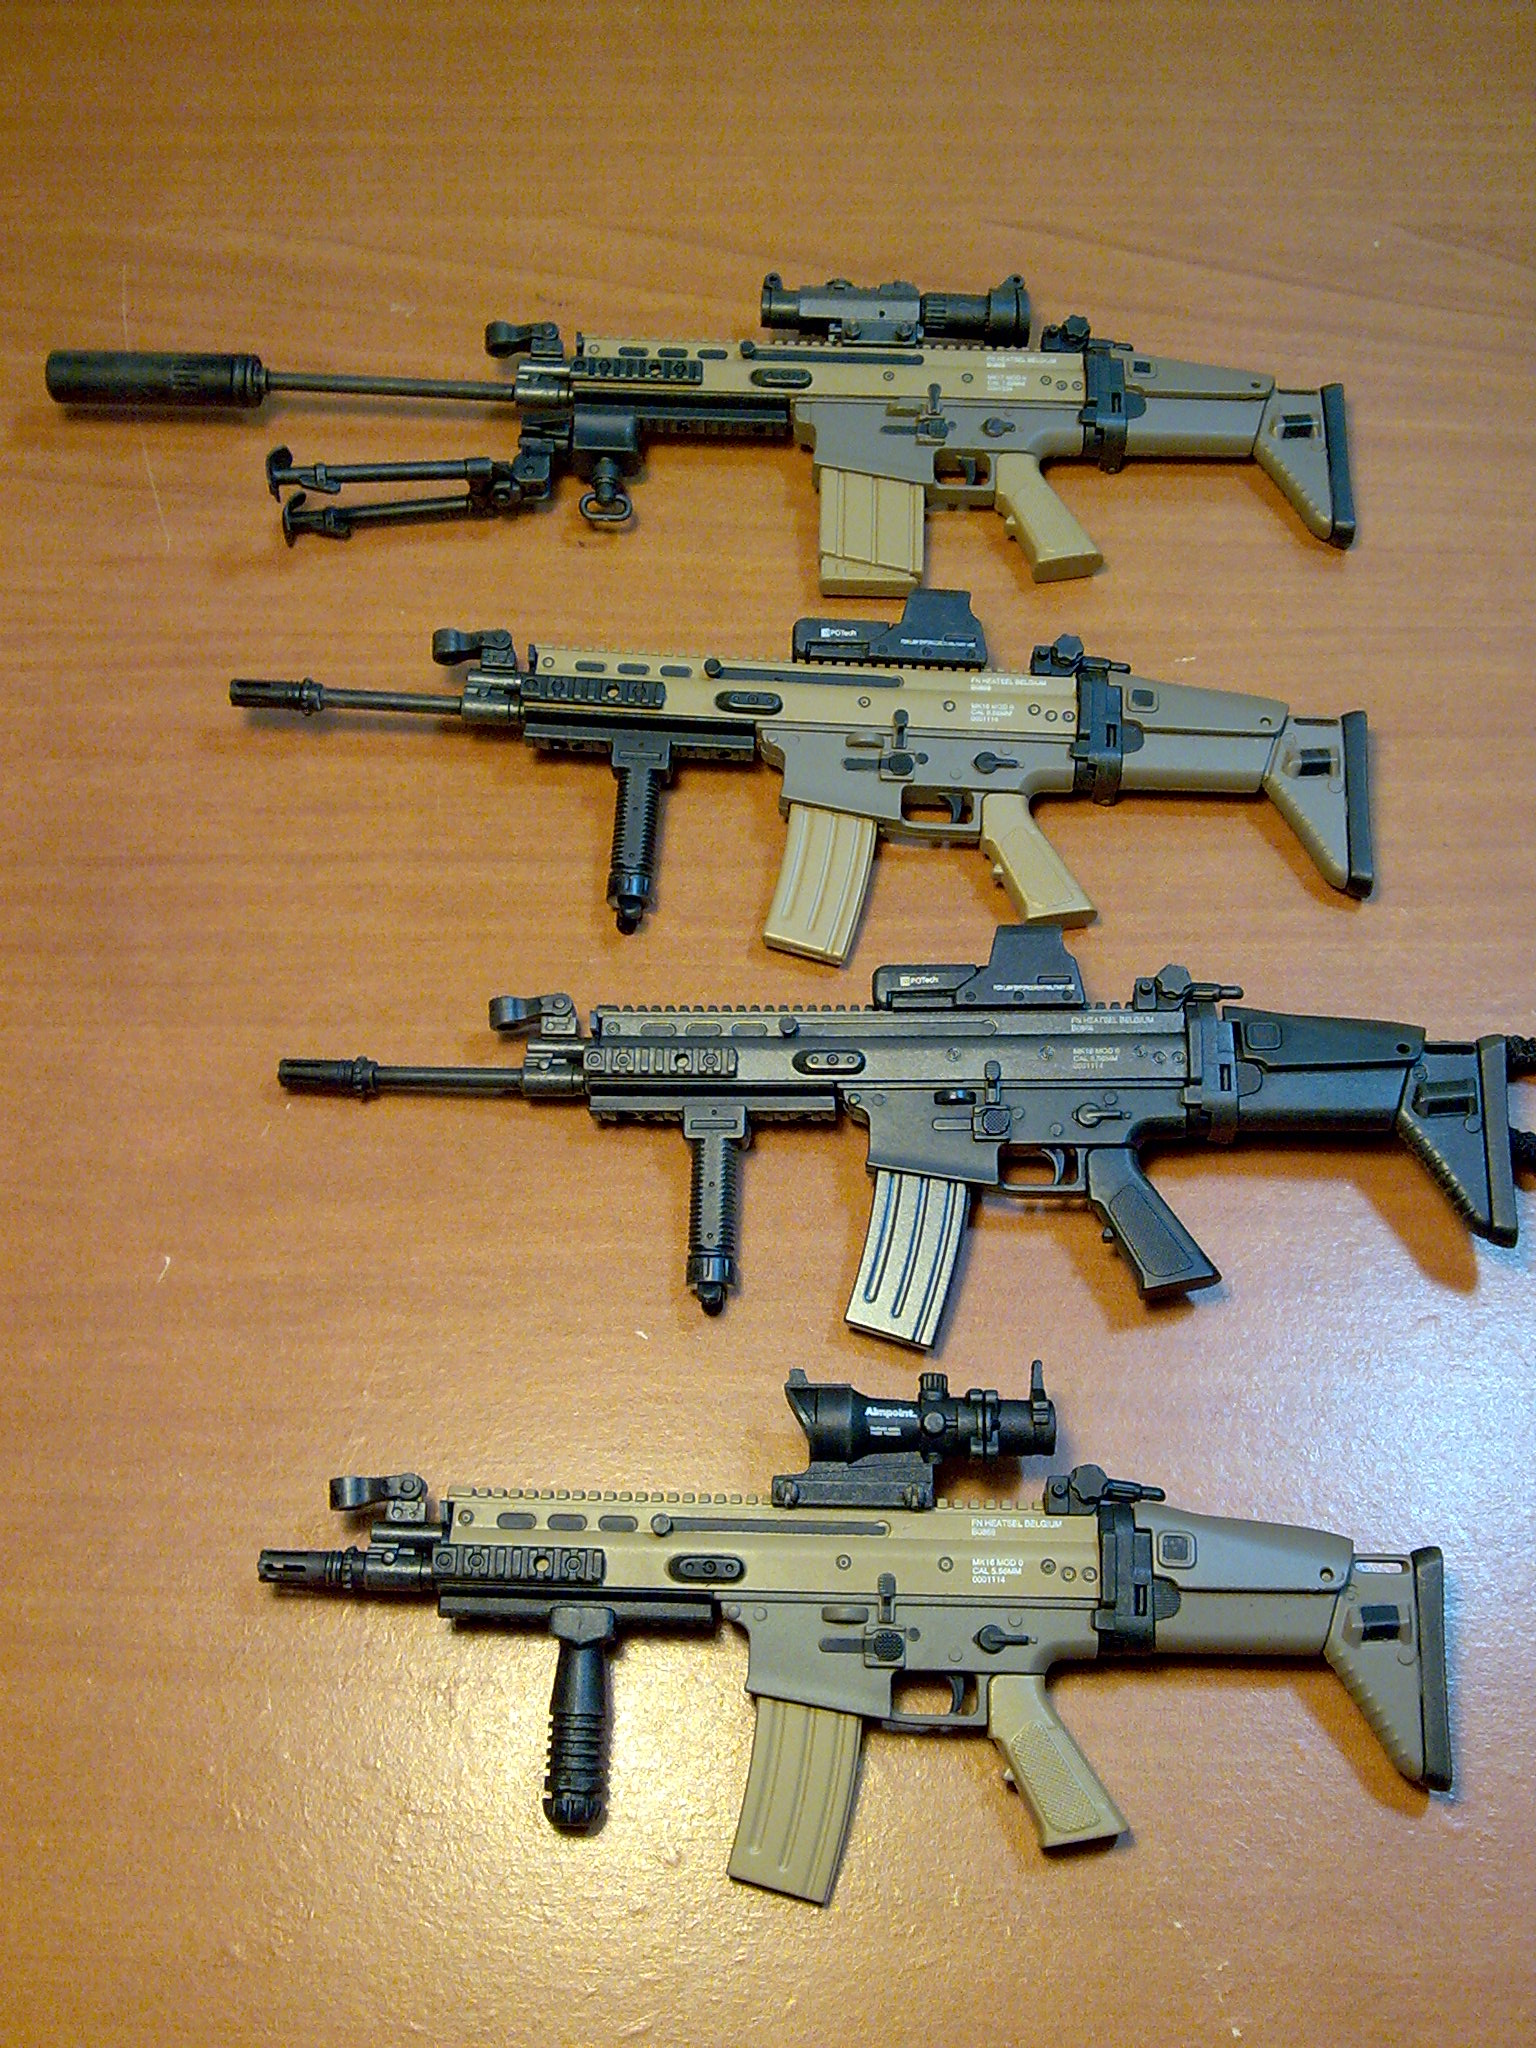 Fn Scar-l Rifle Pics, Weapons Collection